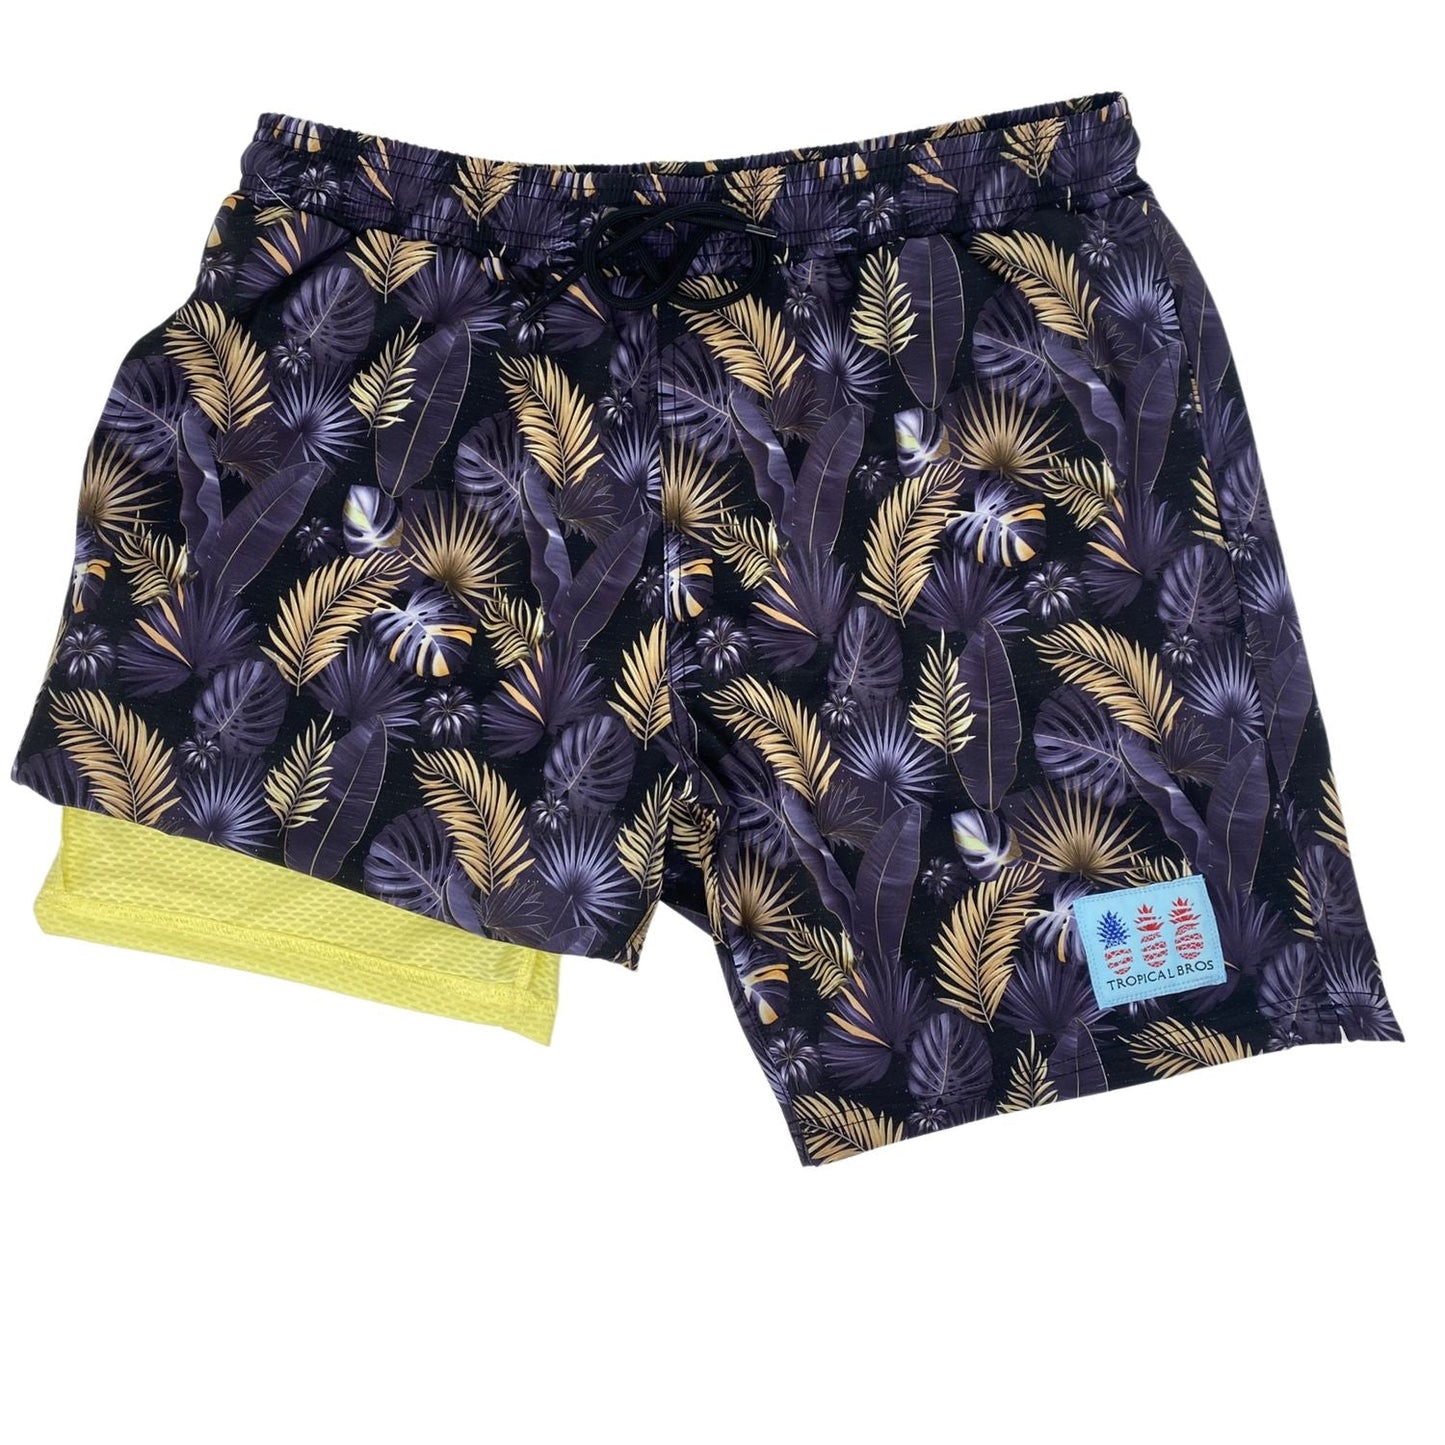 Gold Palms Swimsuit Shorts by Tropical Bros